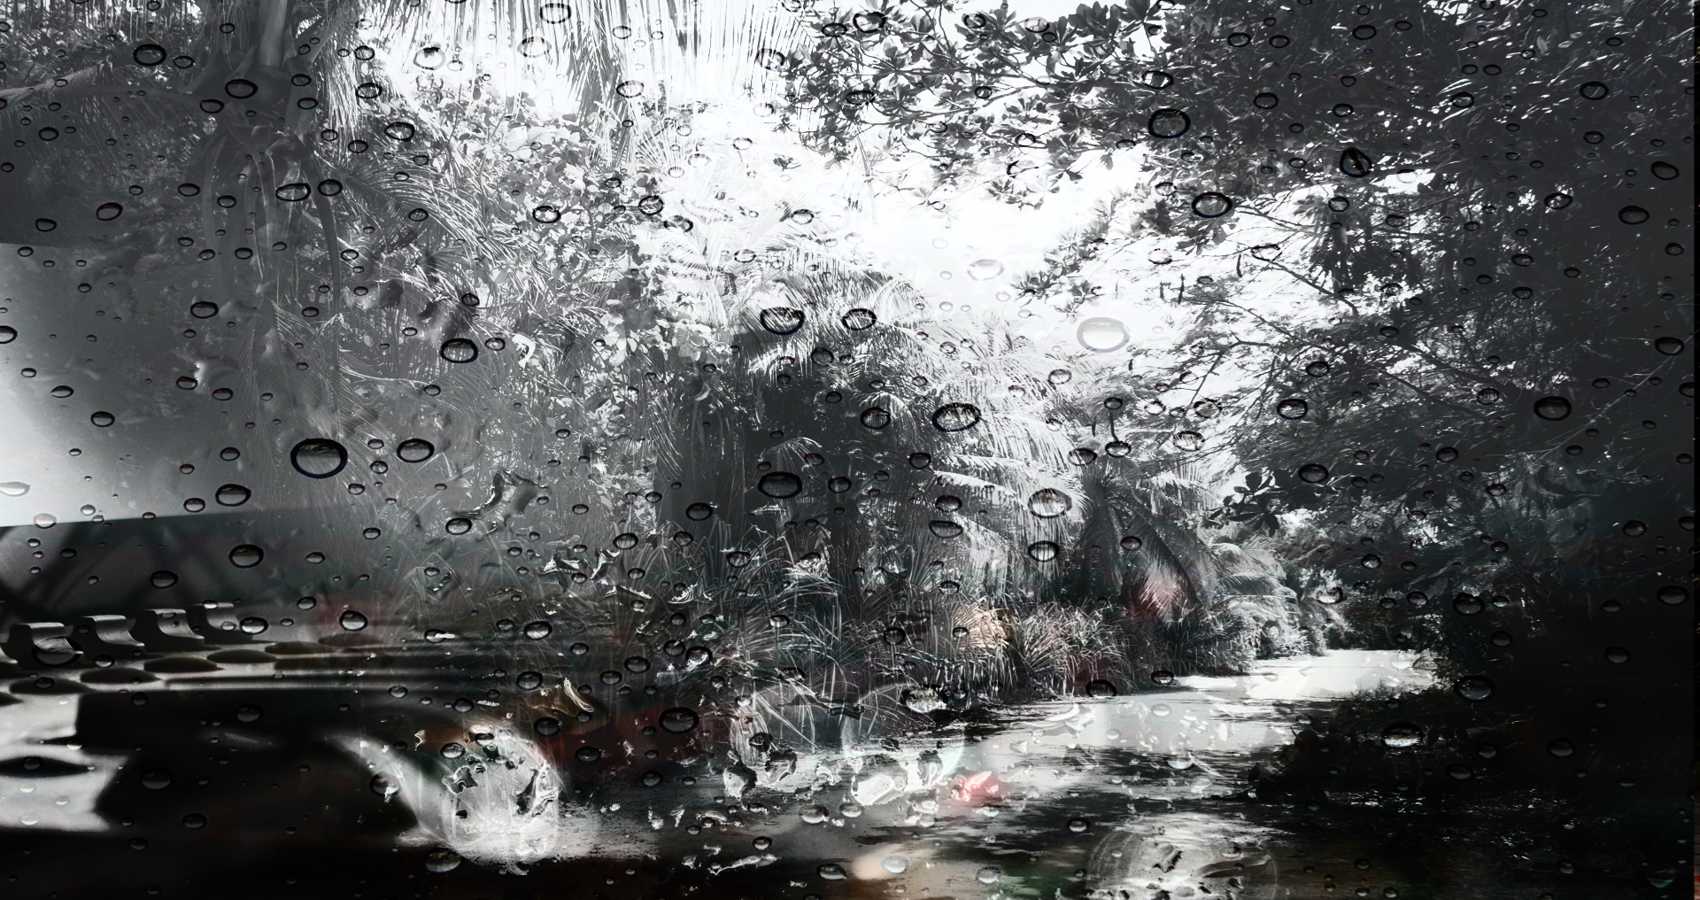 If Rain Could, poetry by Theodora Oniceanu at Spillwords.com